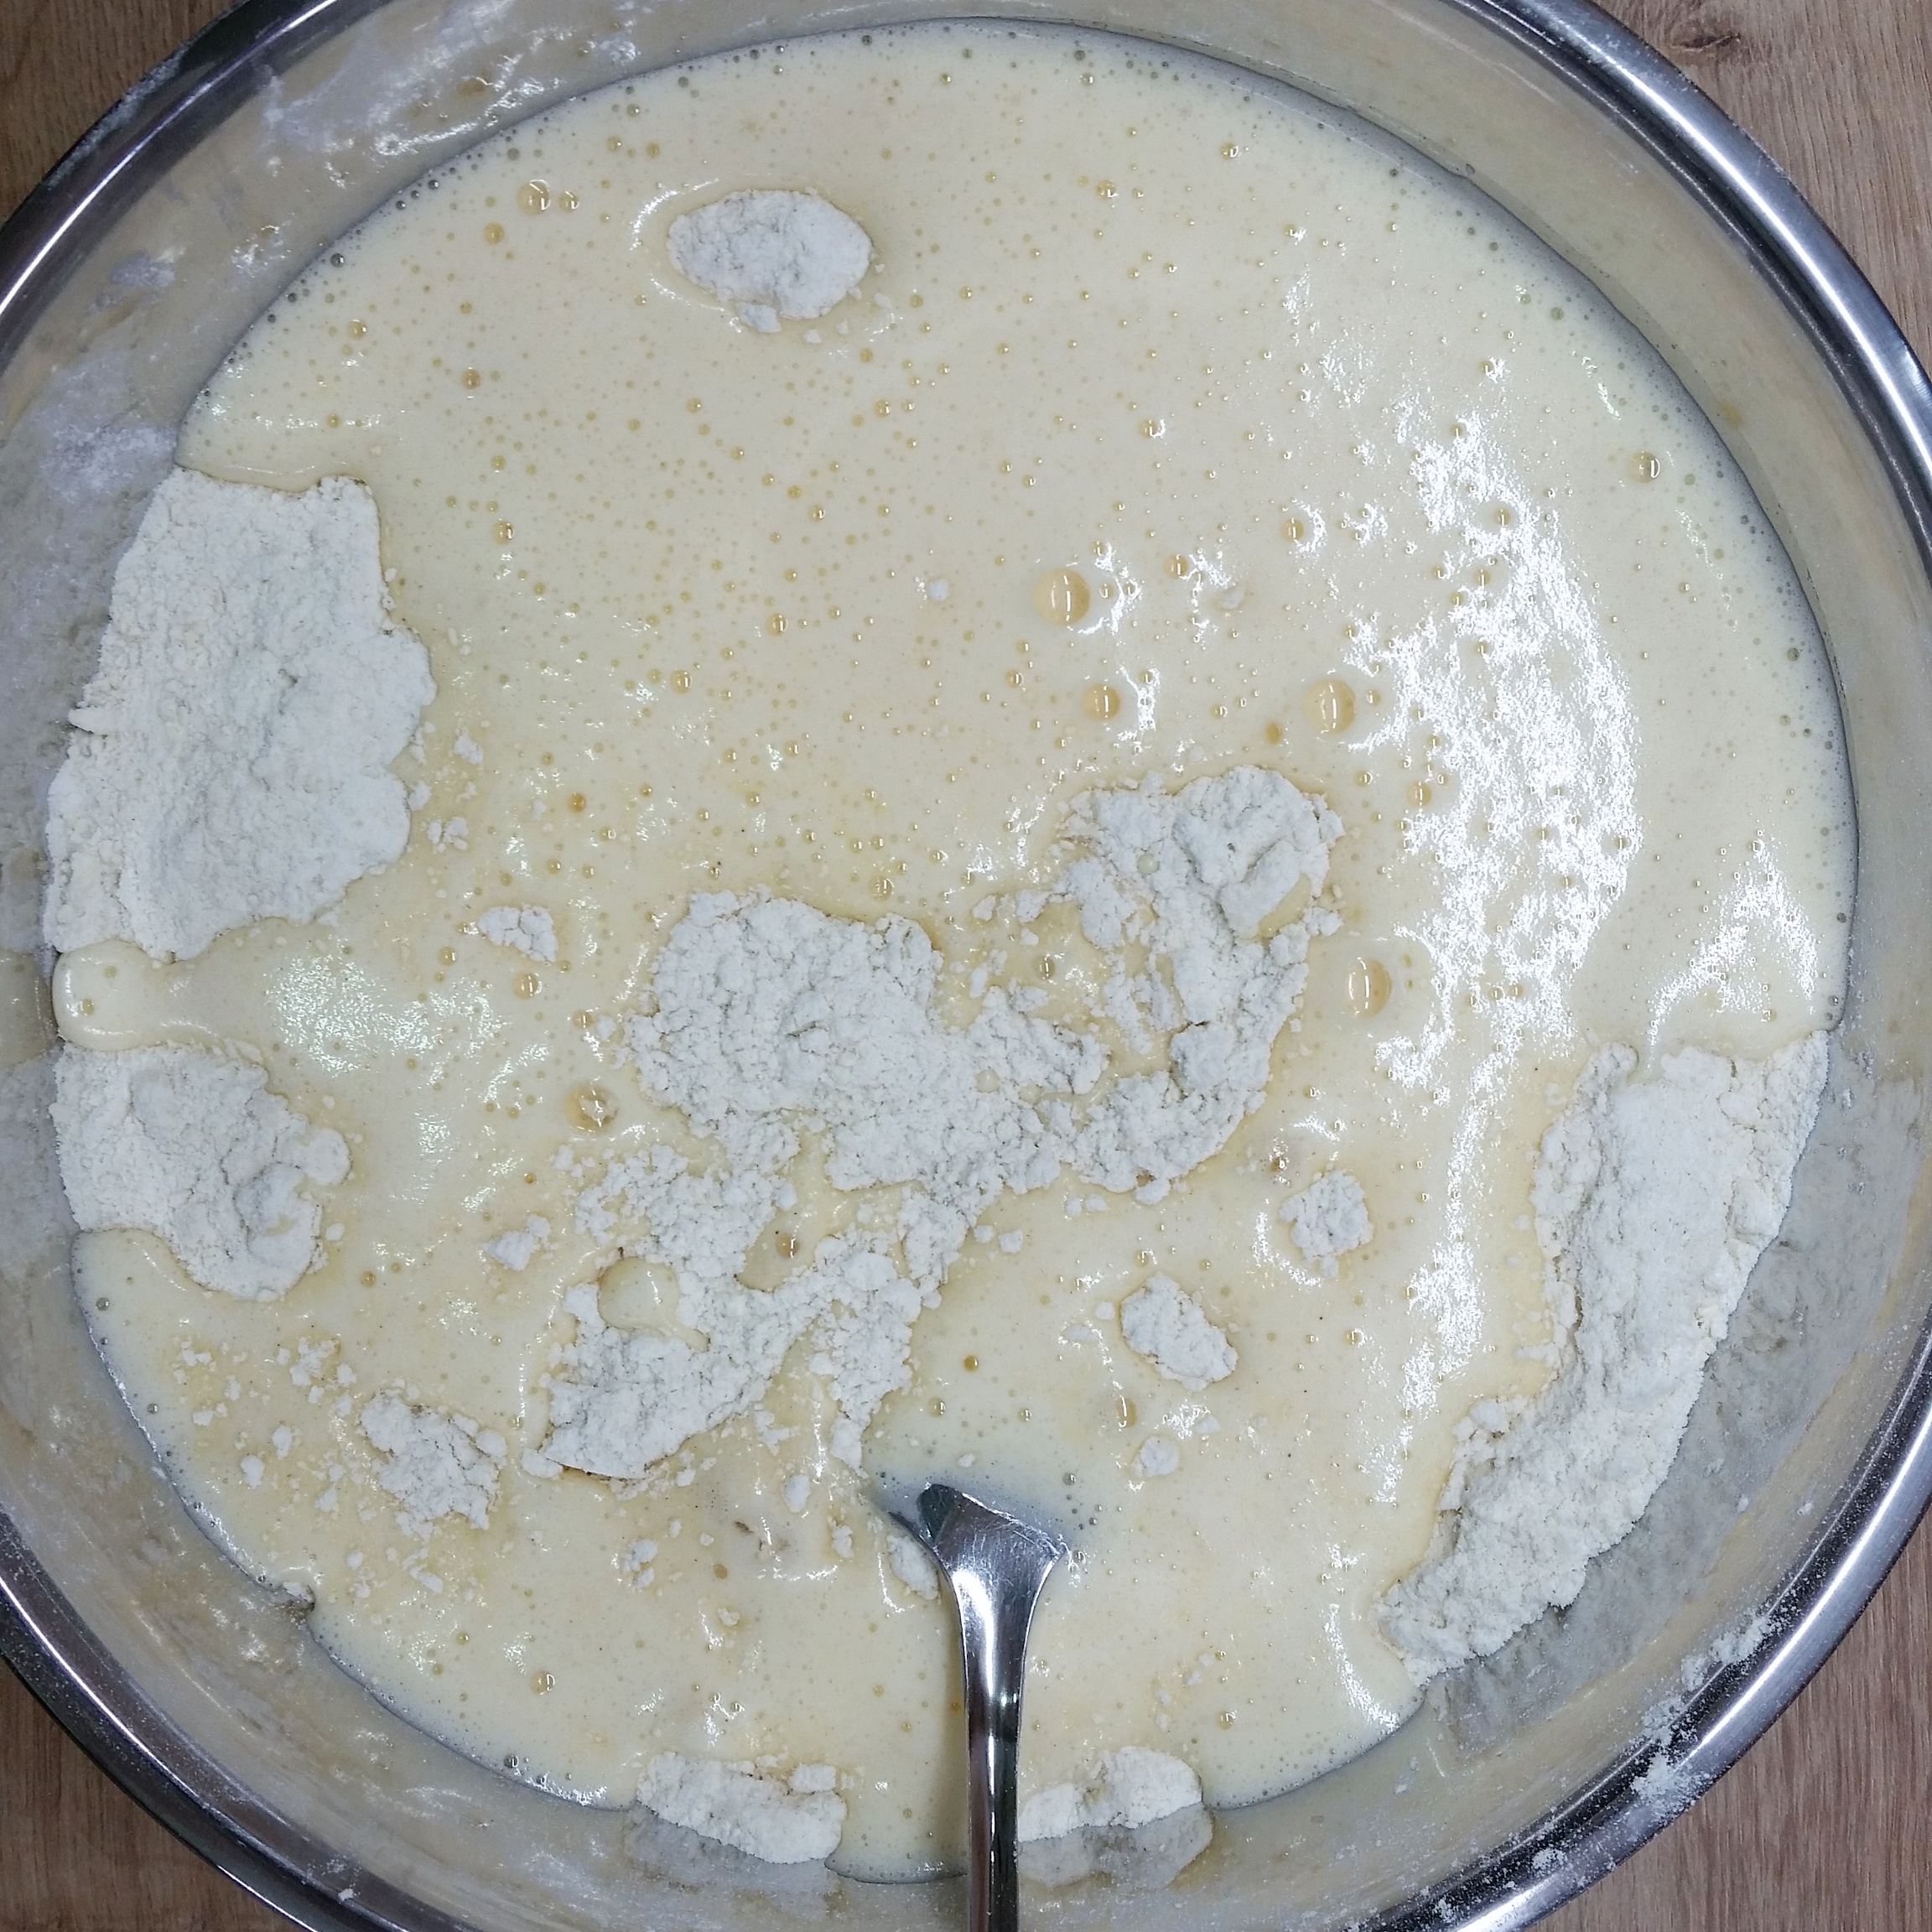 Pan dulce, mixing wet and dry ingredients